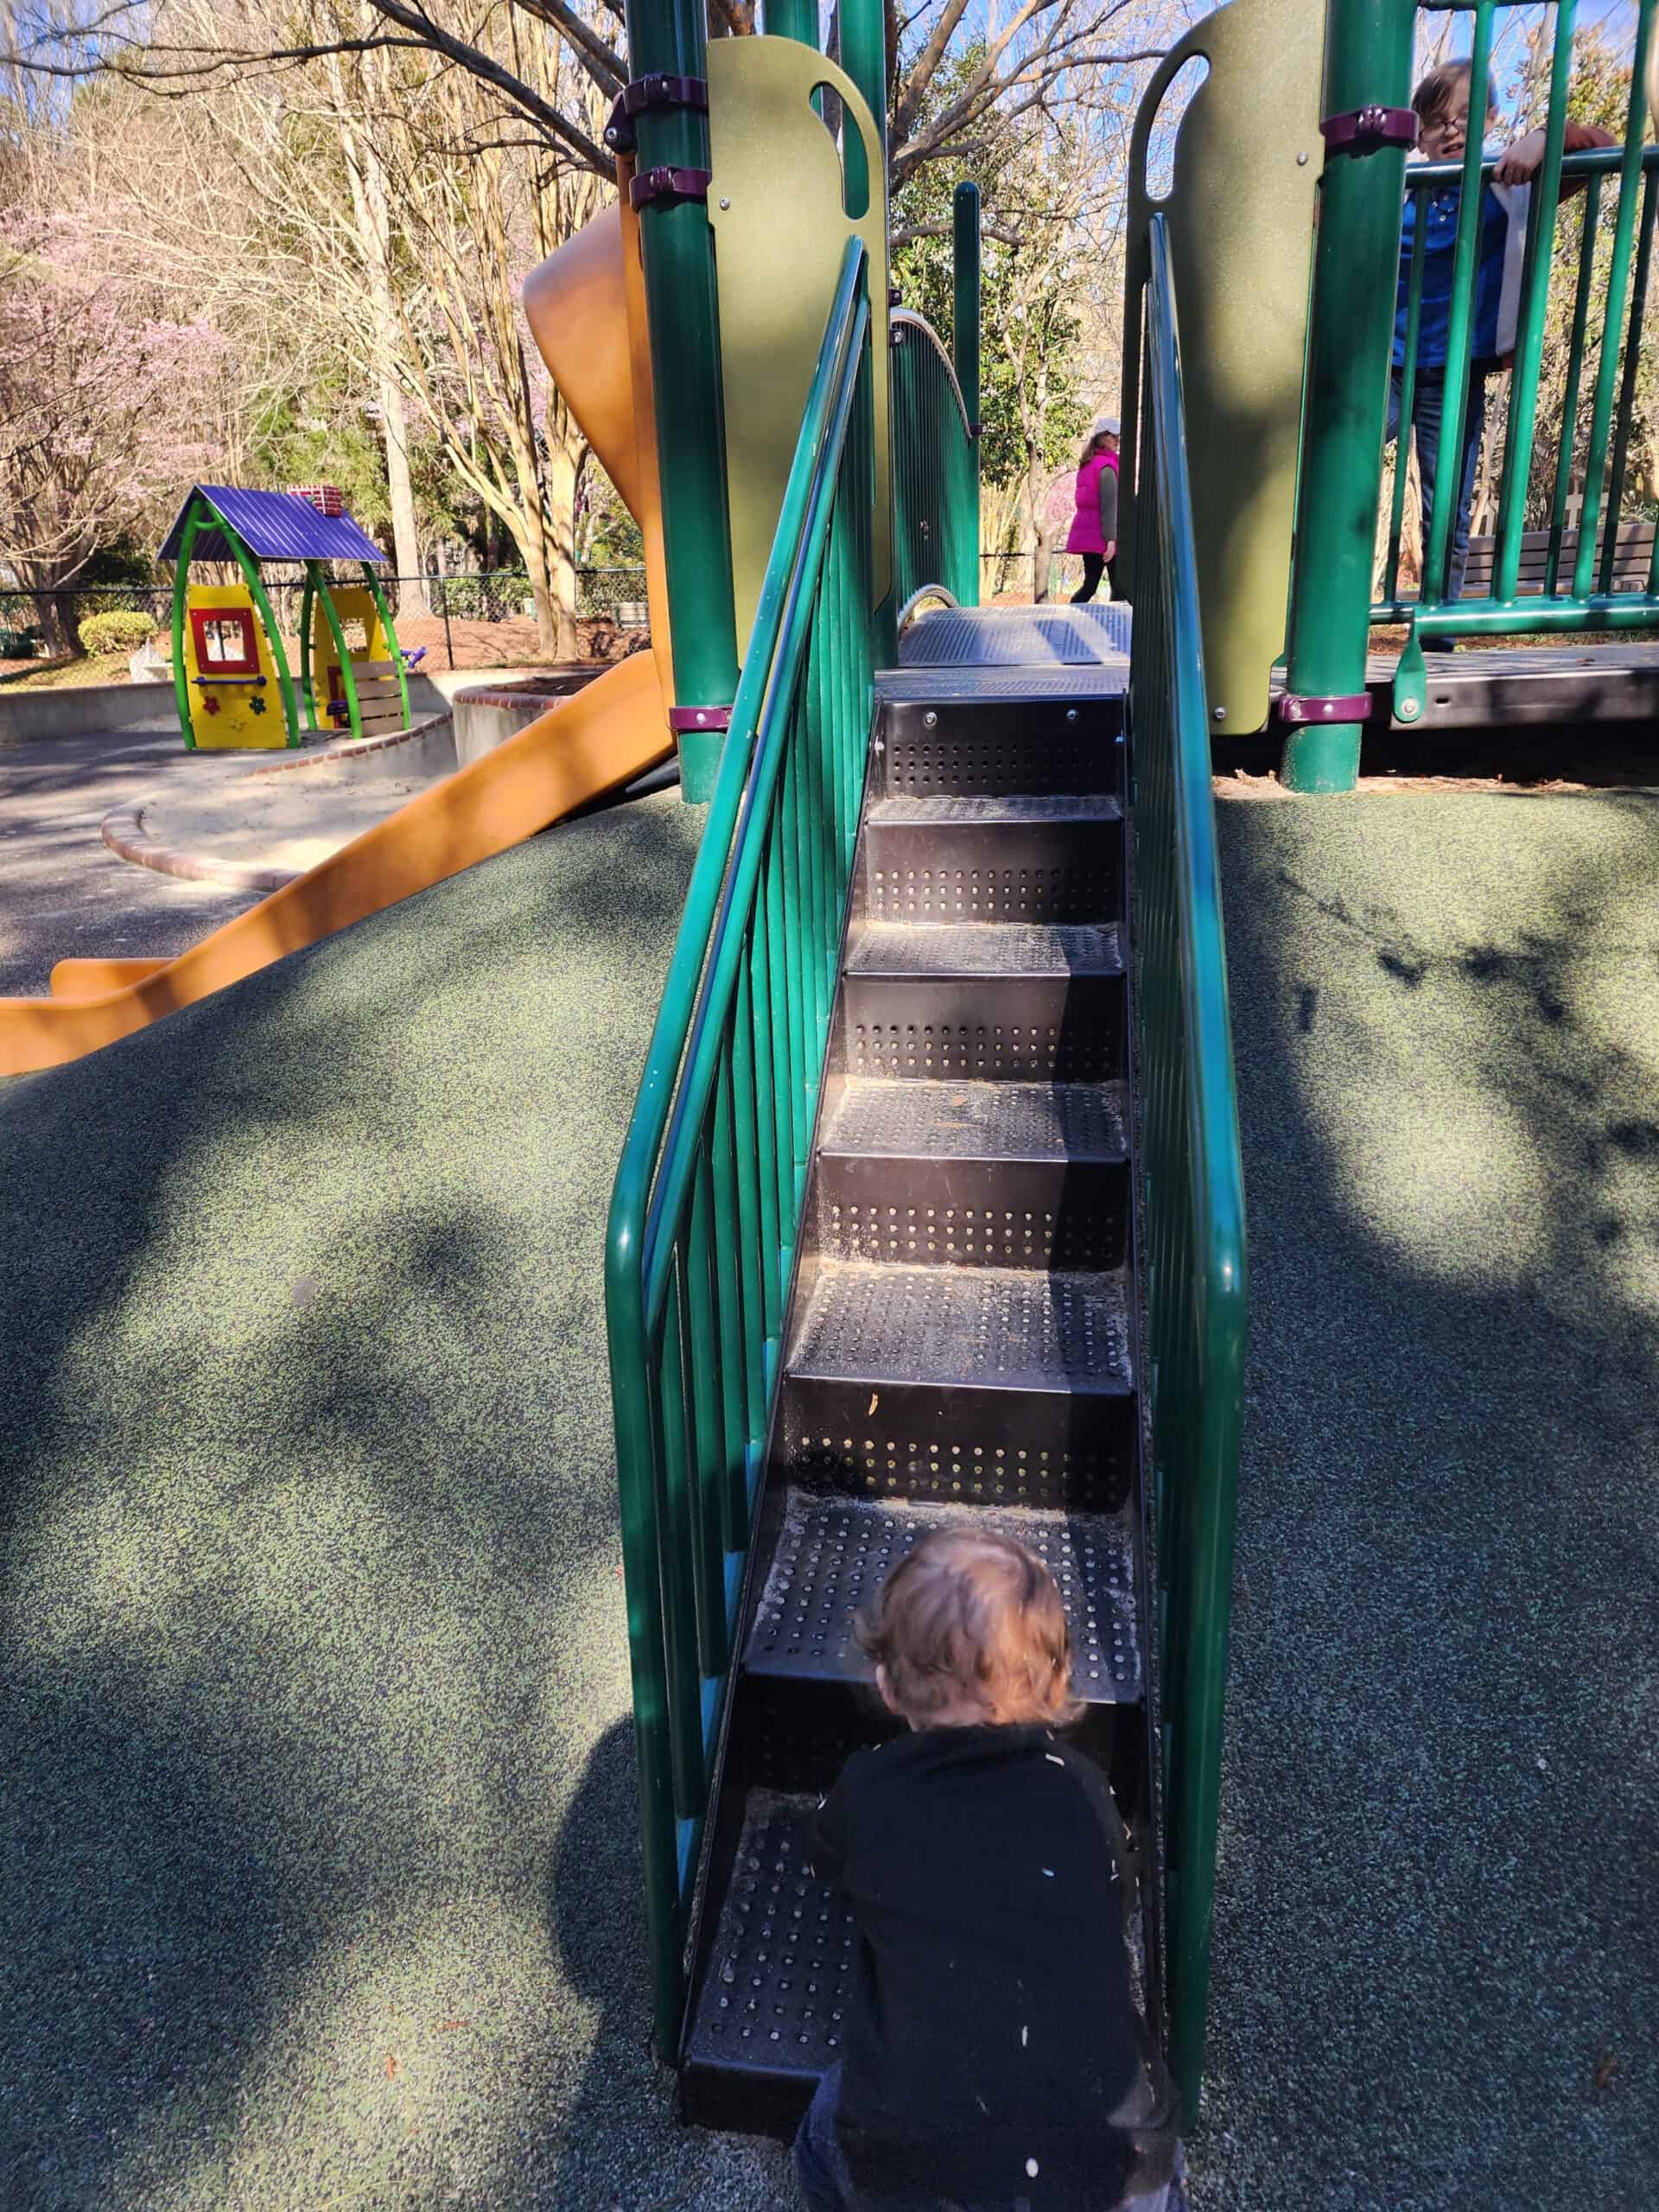 A young child in a black sweater climbs the stairs of a playground slide, with the early springtime sun casting long shadows on the rubber floor, and a glimpse of pink blossoms in the distance.